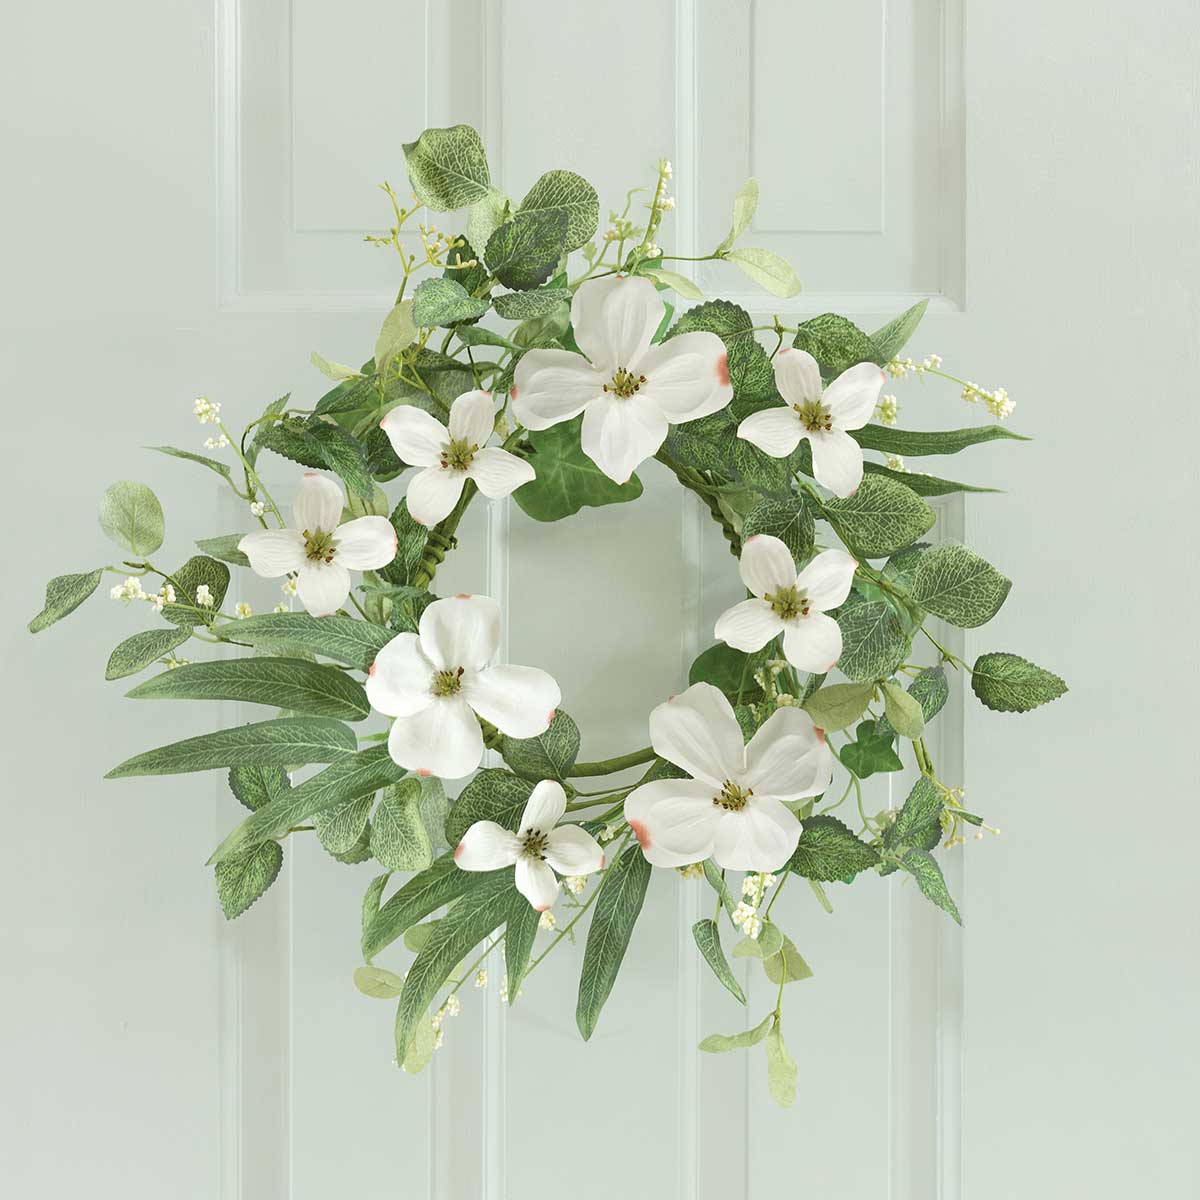 WREATH DOGWOOD/BERRY 16IN (INNER RING 7IN) POLYESTER